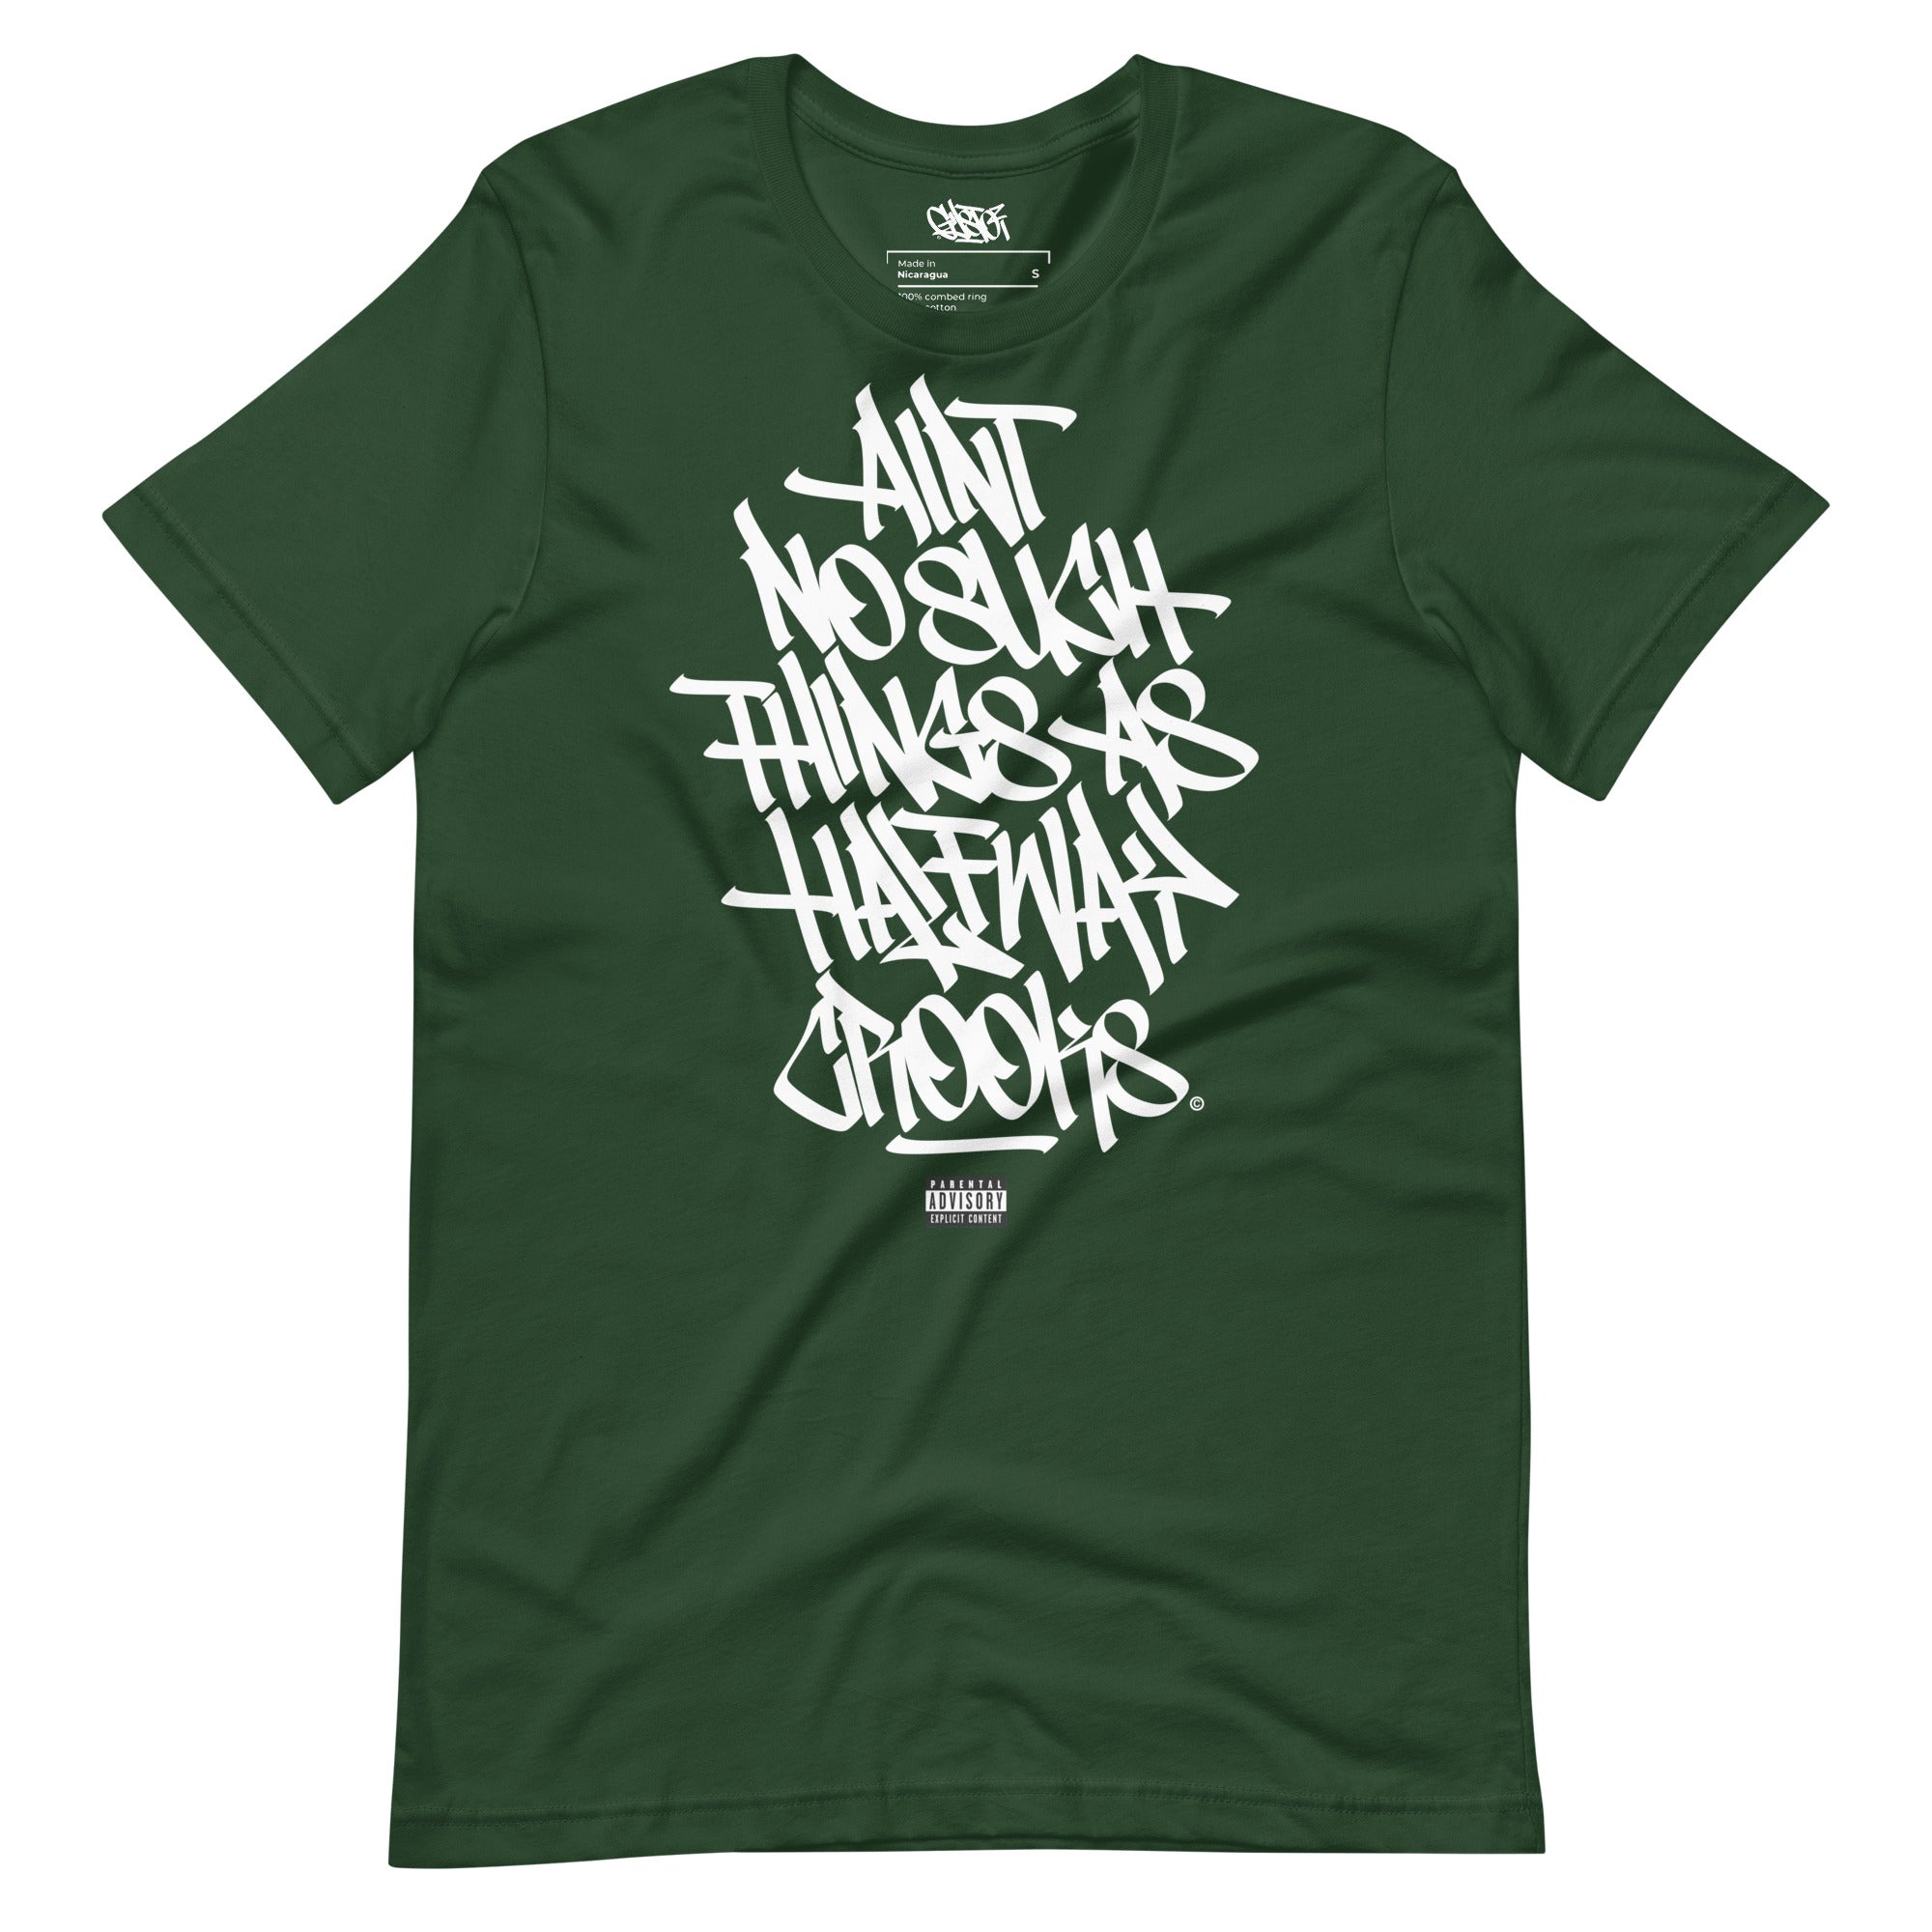 Ain't No Such Things As Halfway Crooks - Unisex T-Shirt - GustoNYC